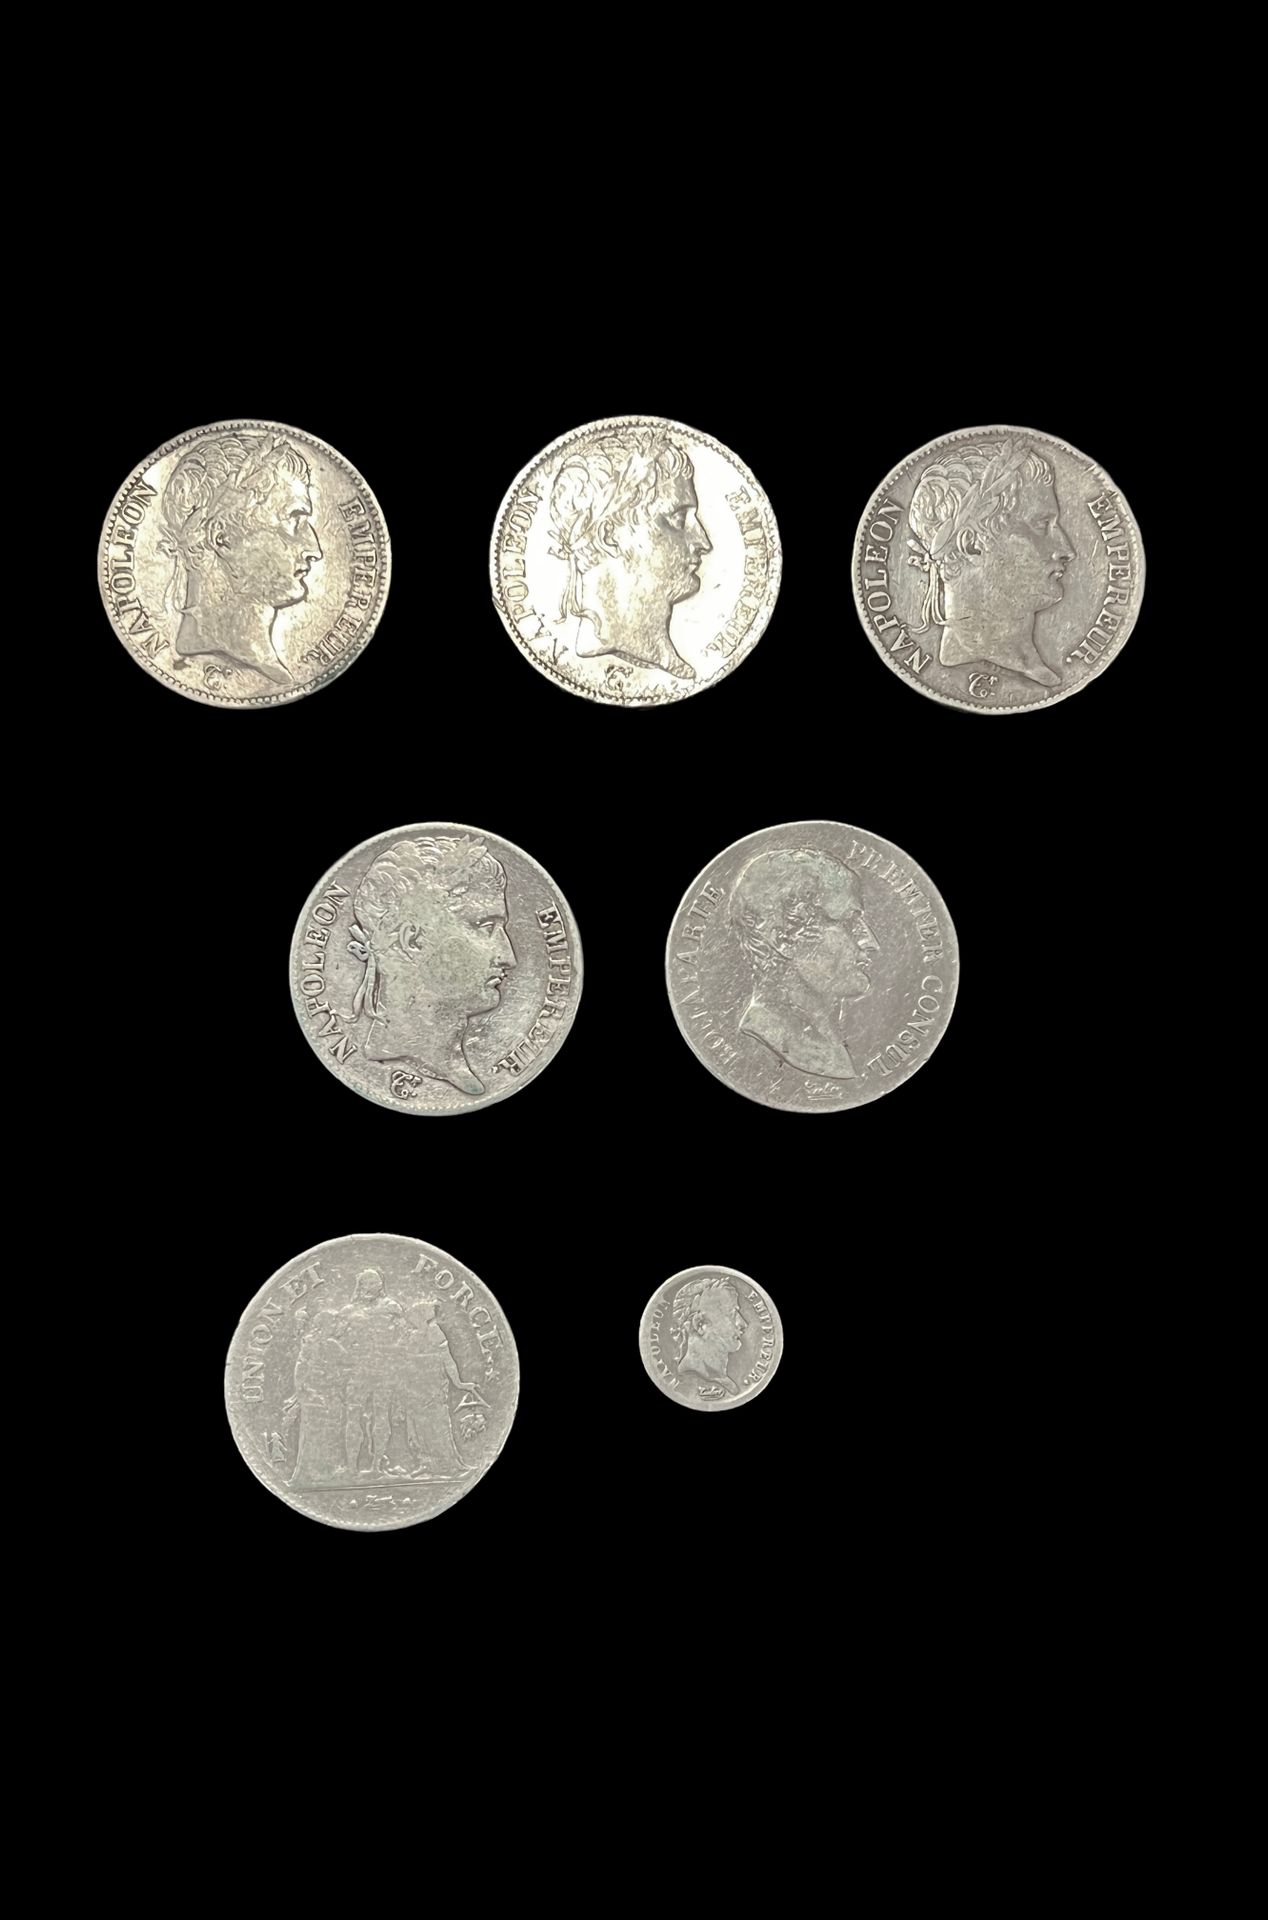 Null Suite of 7 silver coins including :

- 5 francs French Republic year 8 (179&hellip;